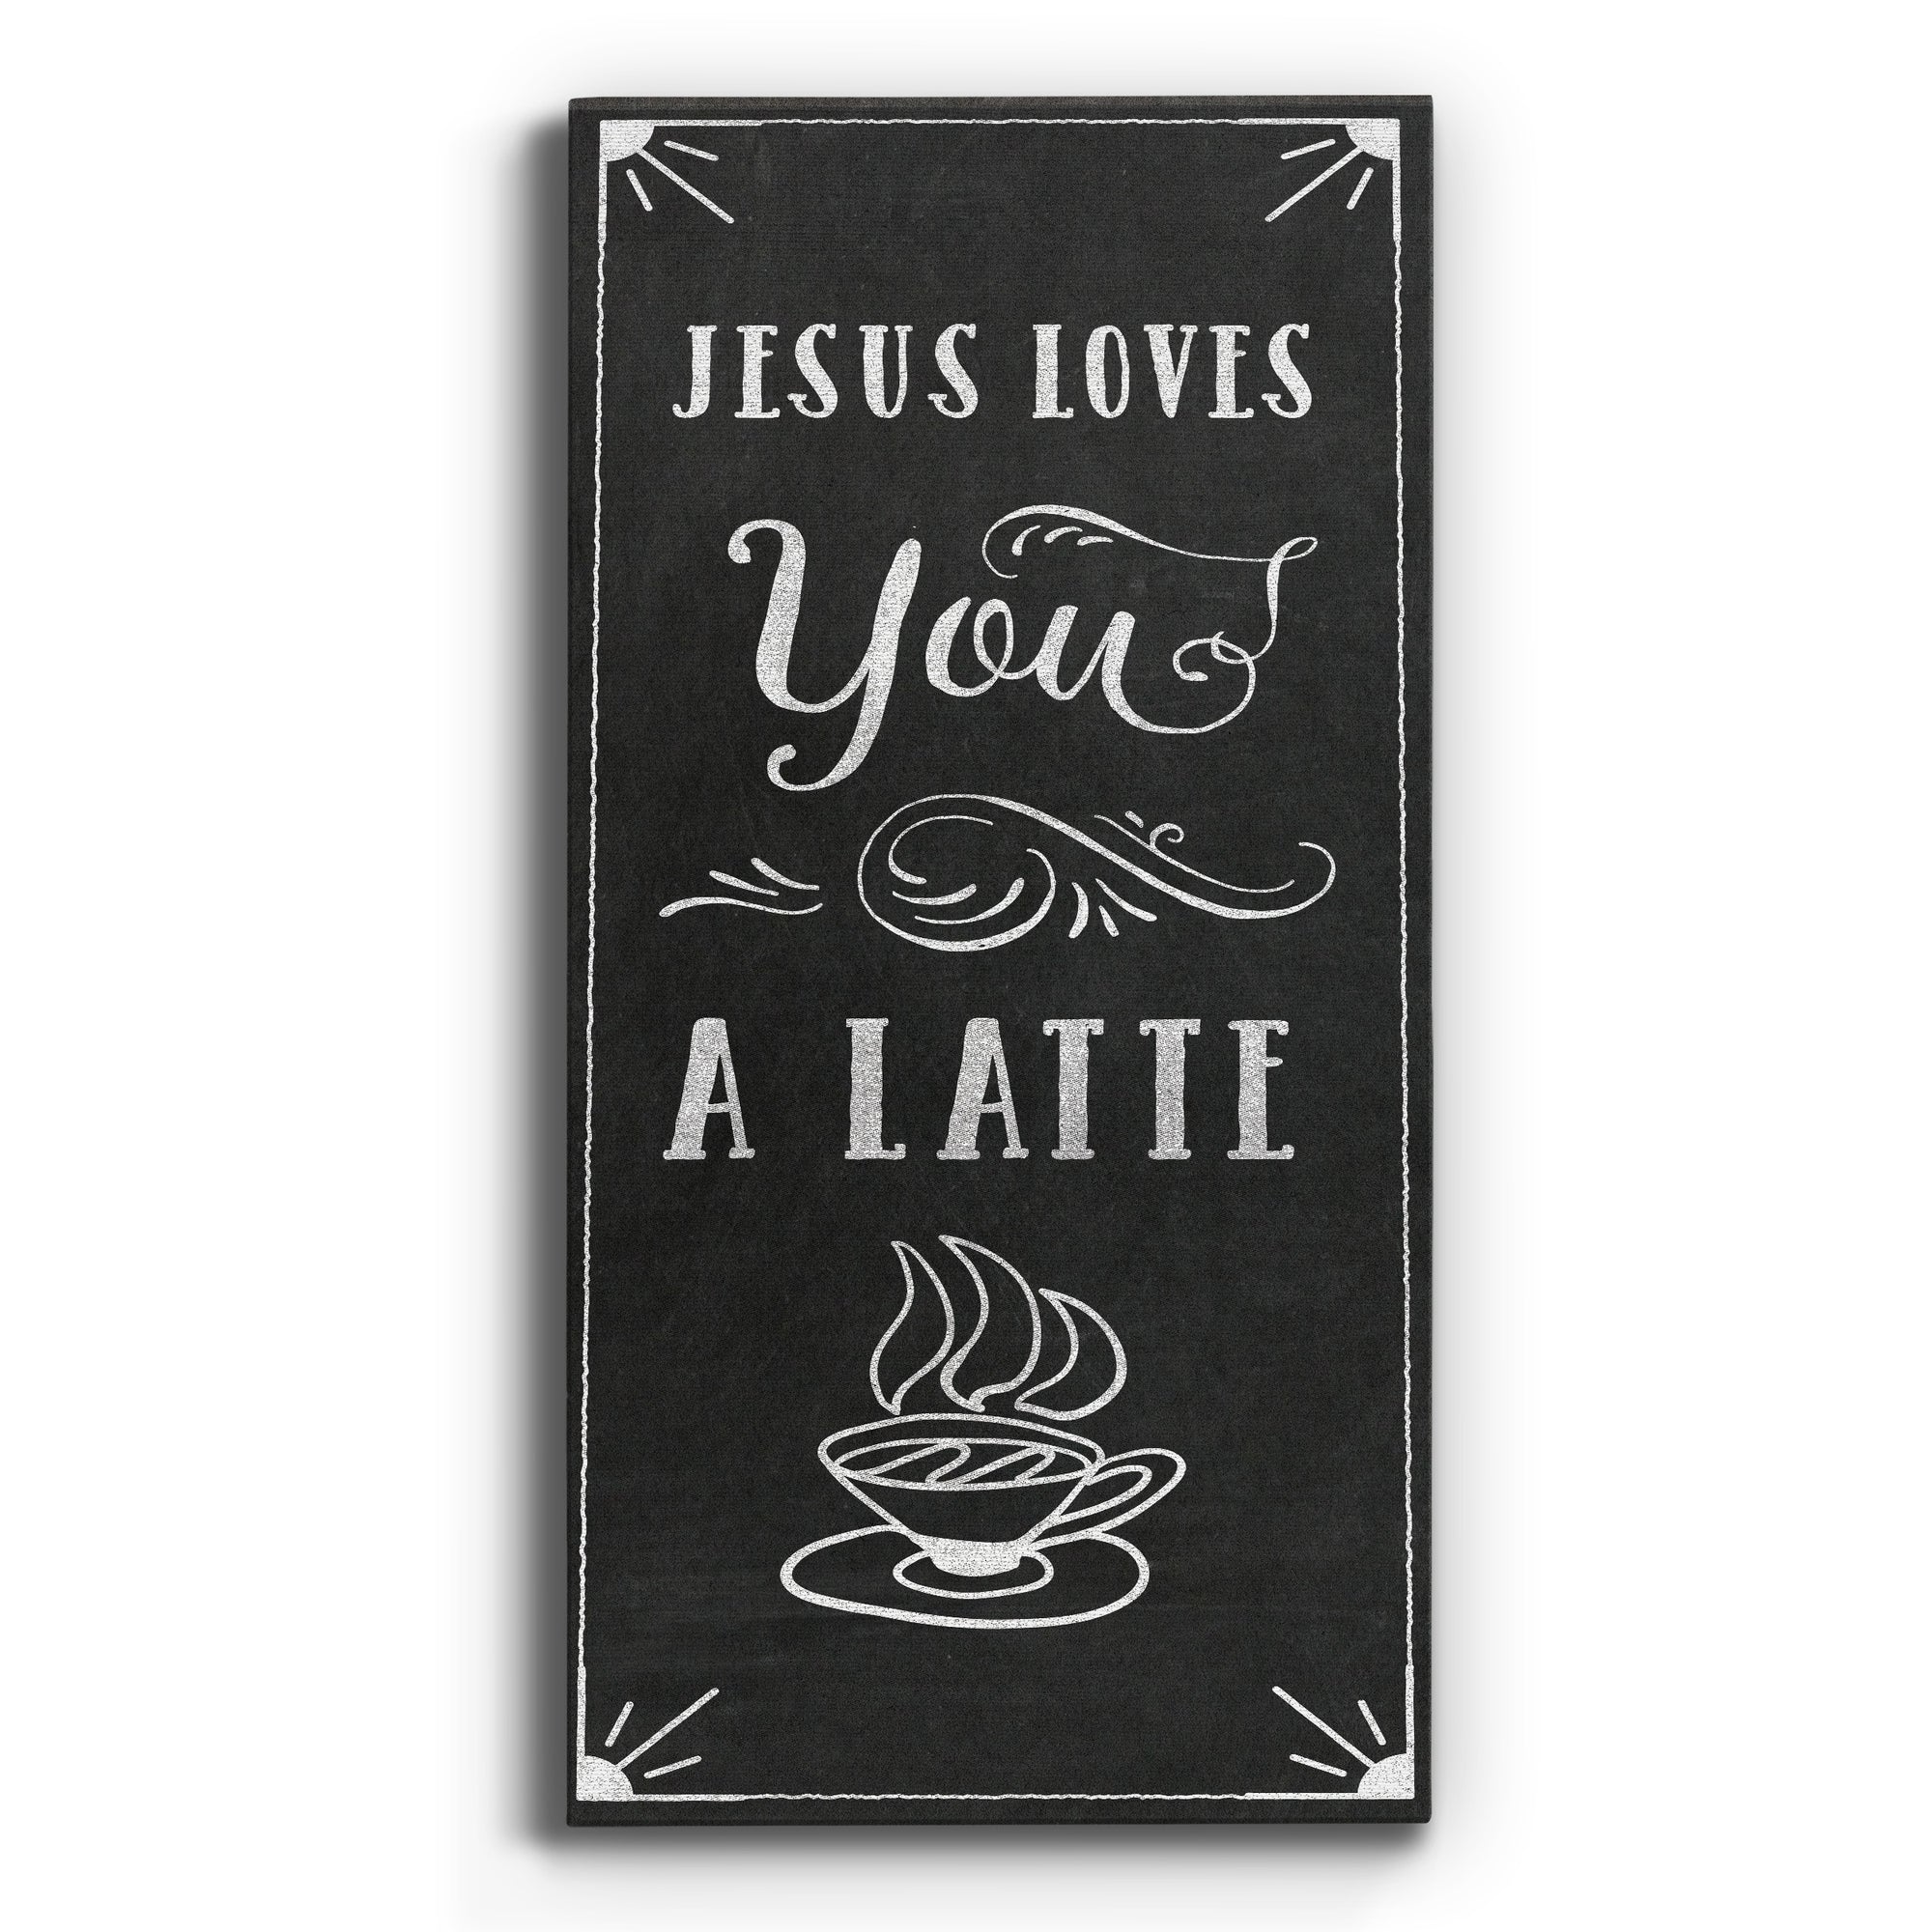 Love You A Latte - Premium Gallery Wrapped Canvas - Ready to Hang